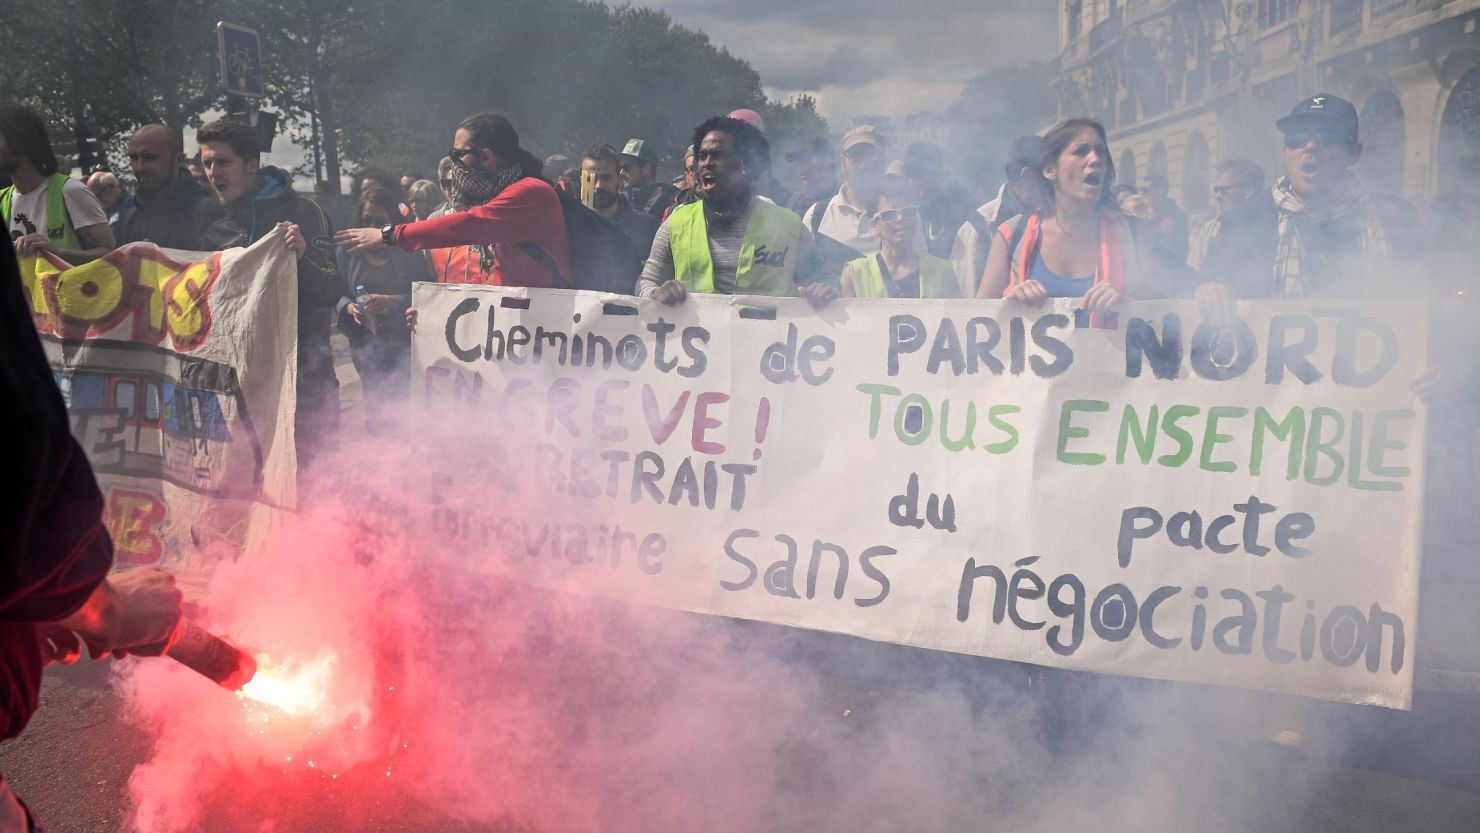 Thousands of people took to the streets during the May Day demonstrations in Paris.